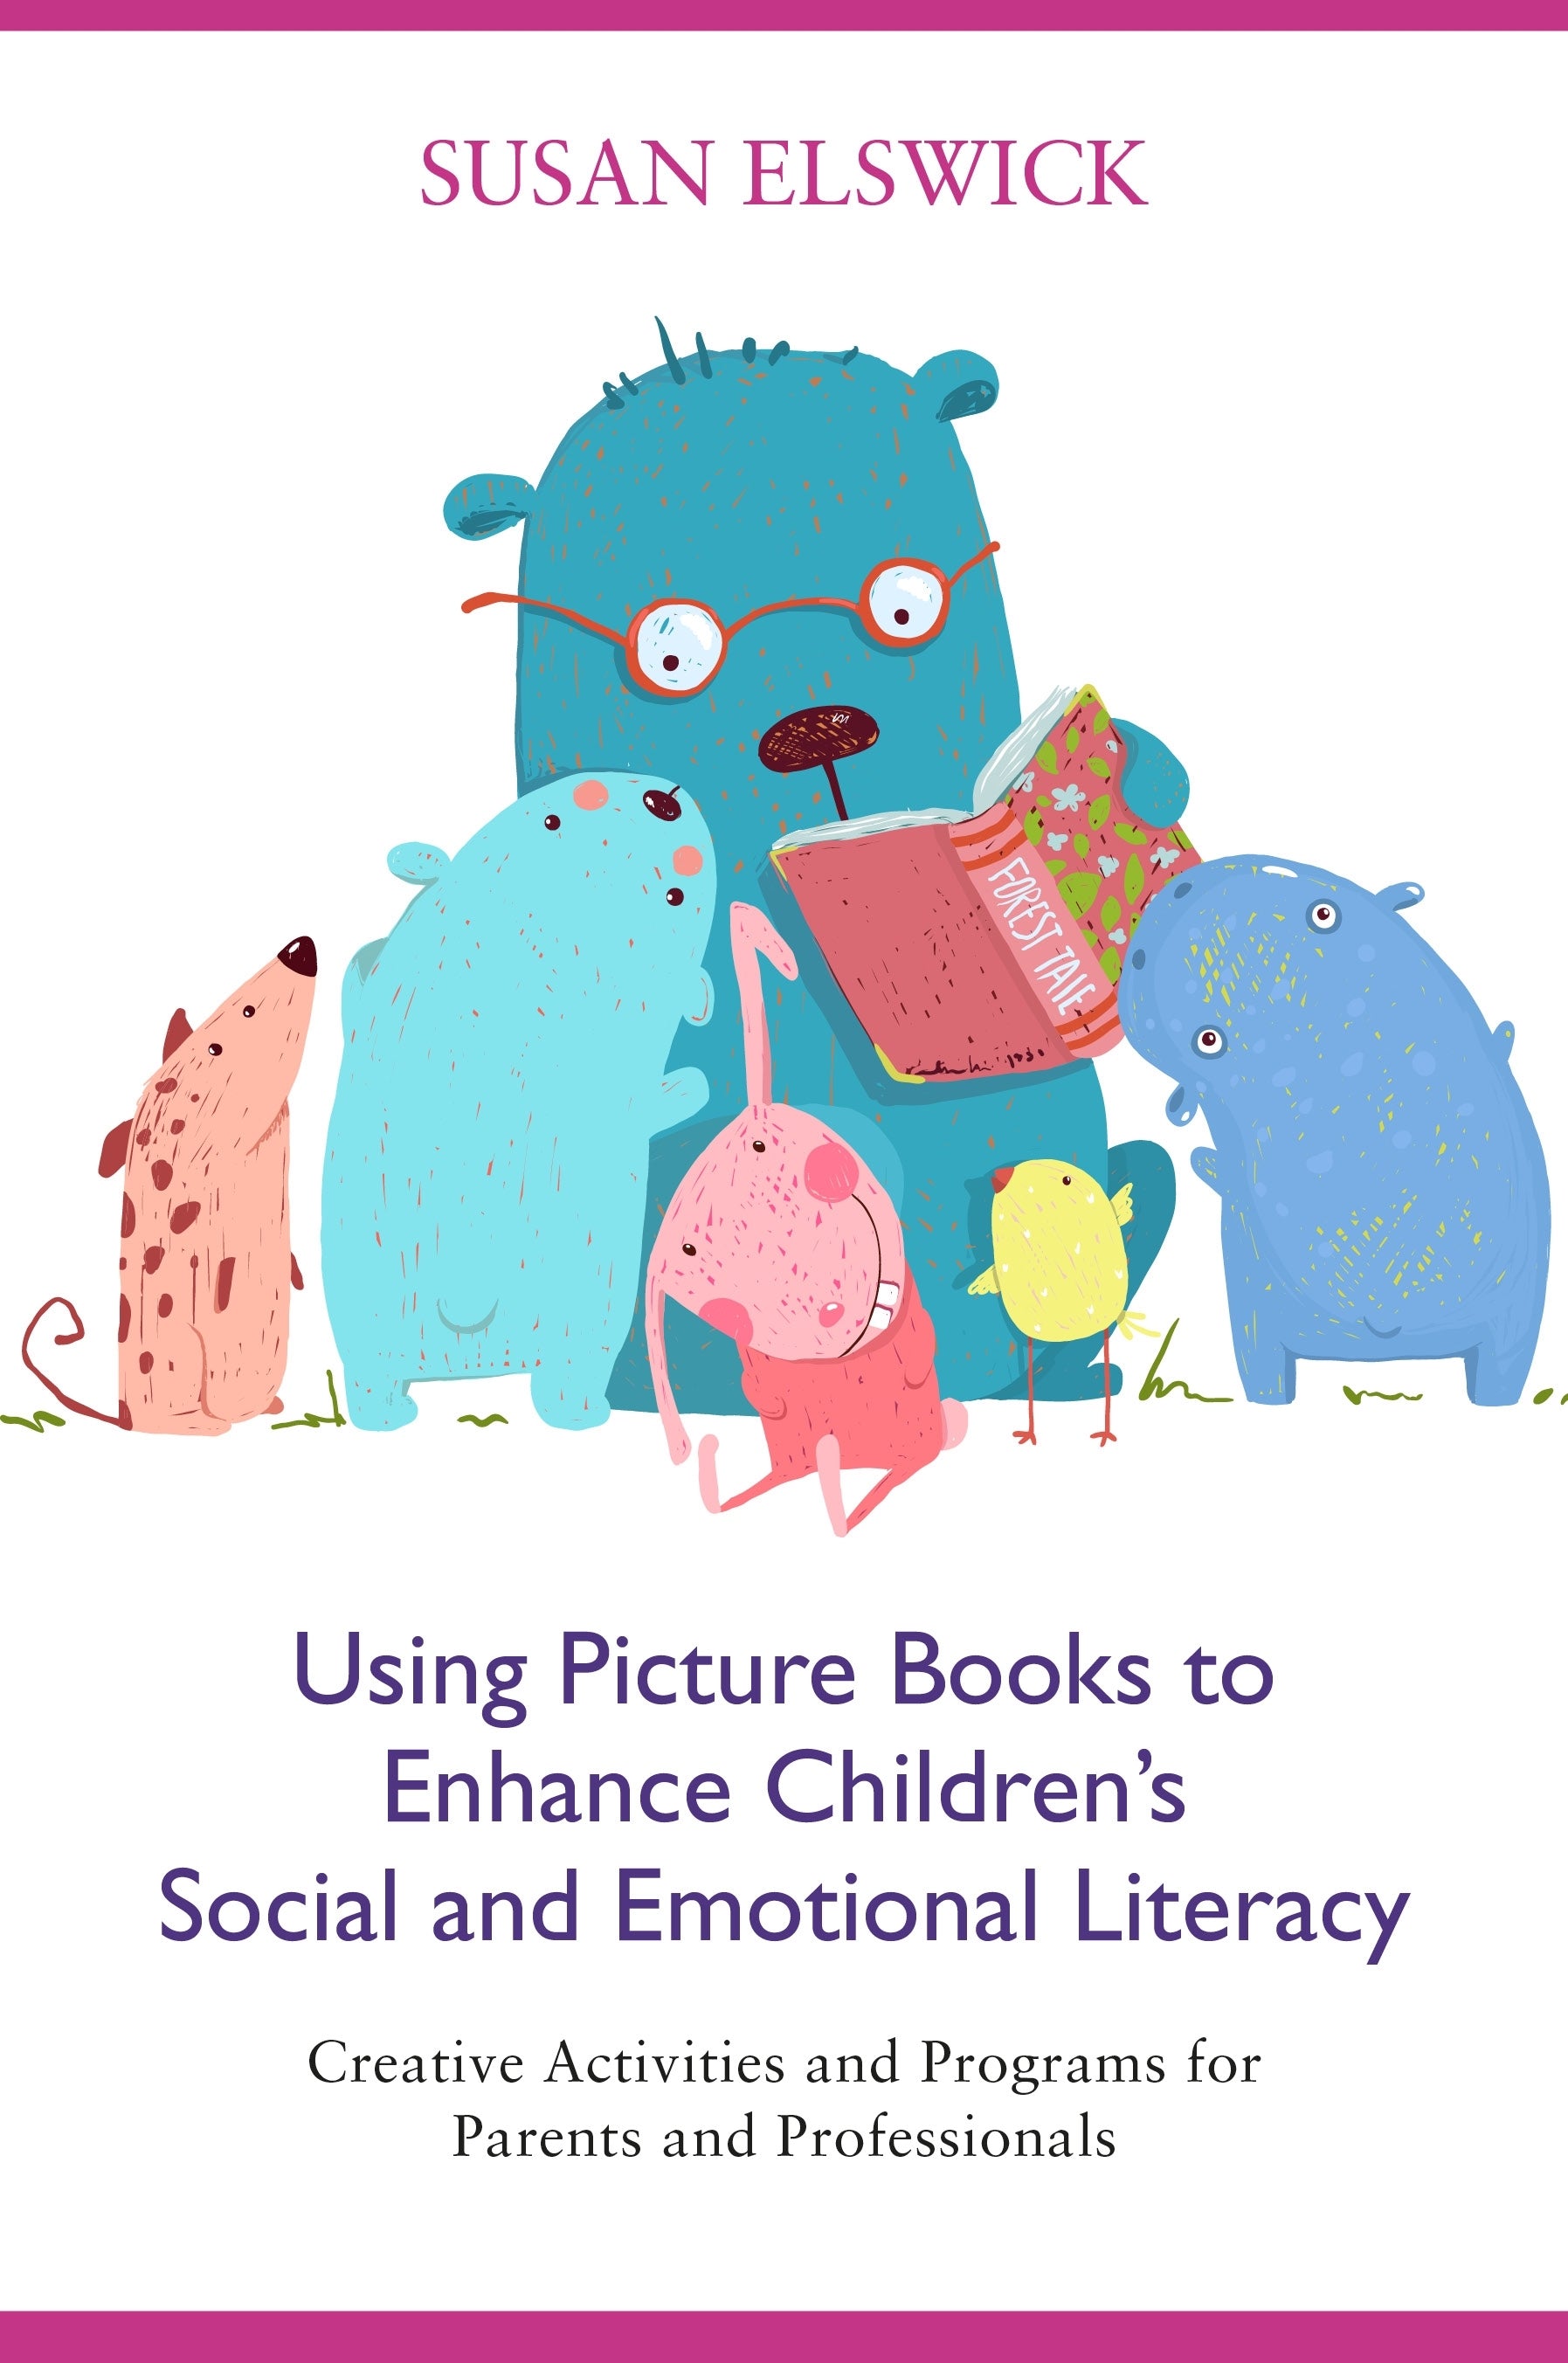 Using Picture Books to Enhance Children's Social and Emotional Literacy by Susan Elswick